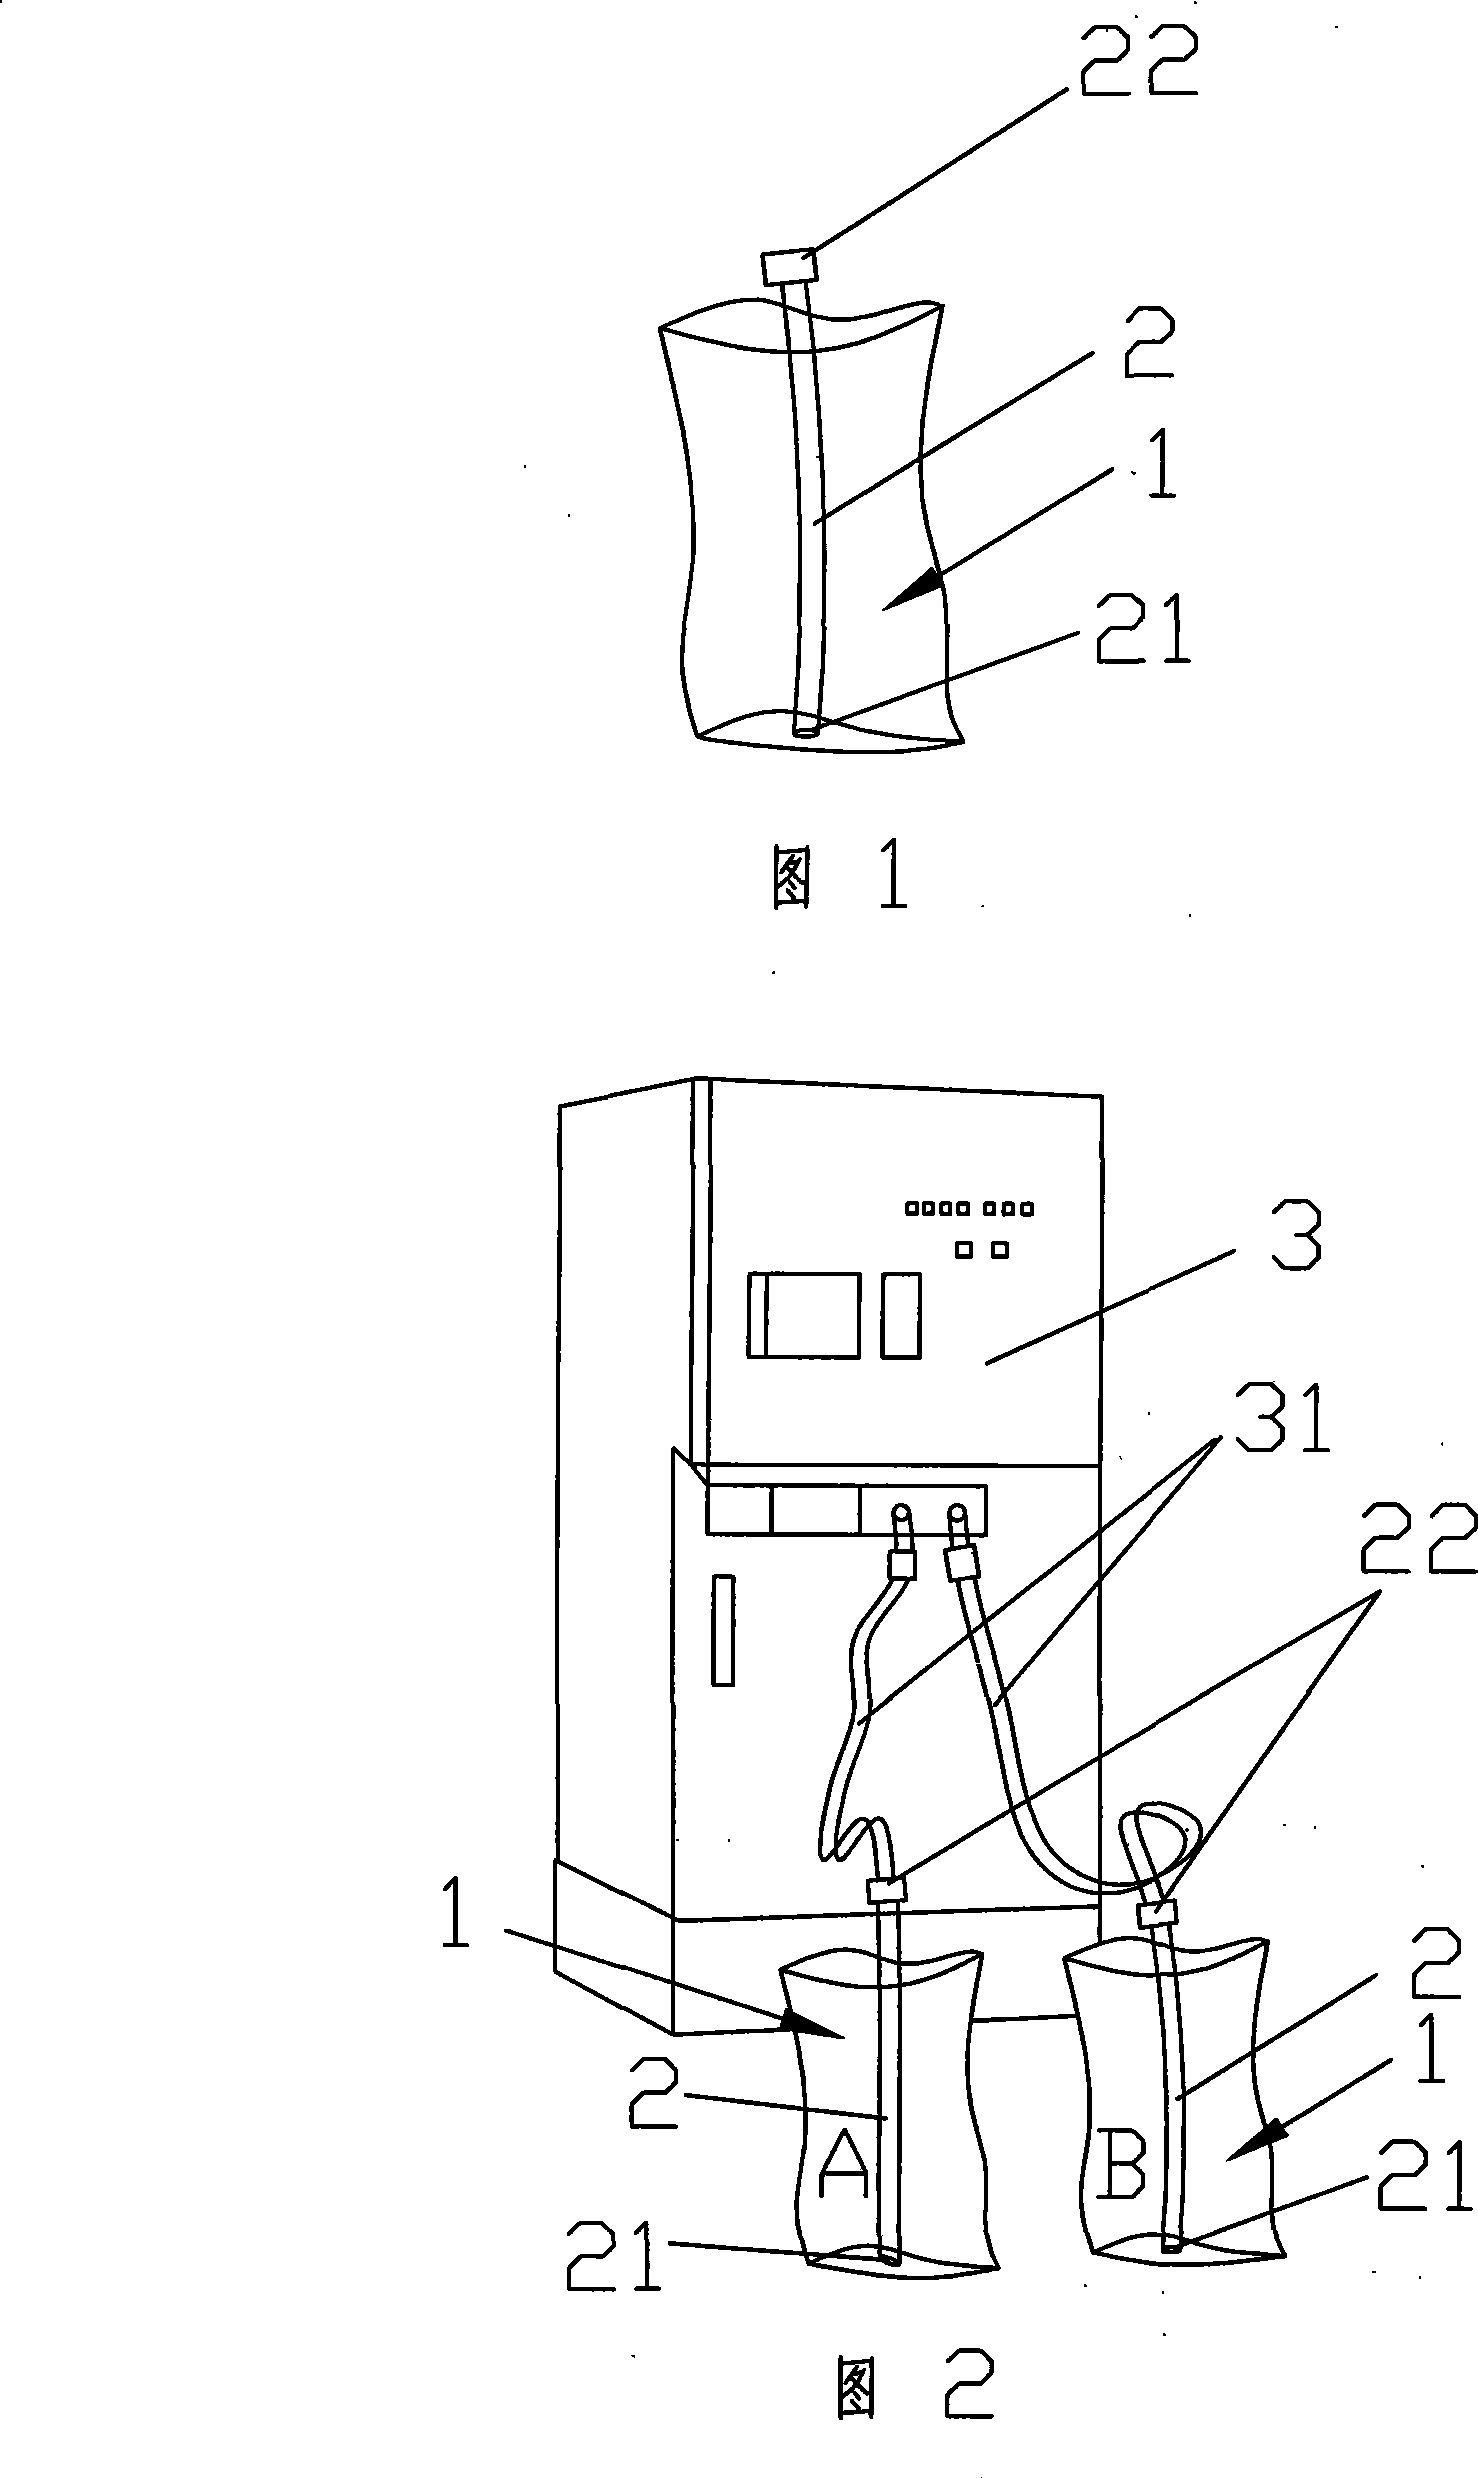 Hemodialysis liquid as well as enclosed soft package bag thereof